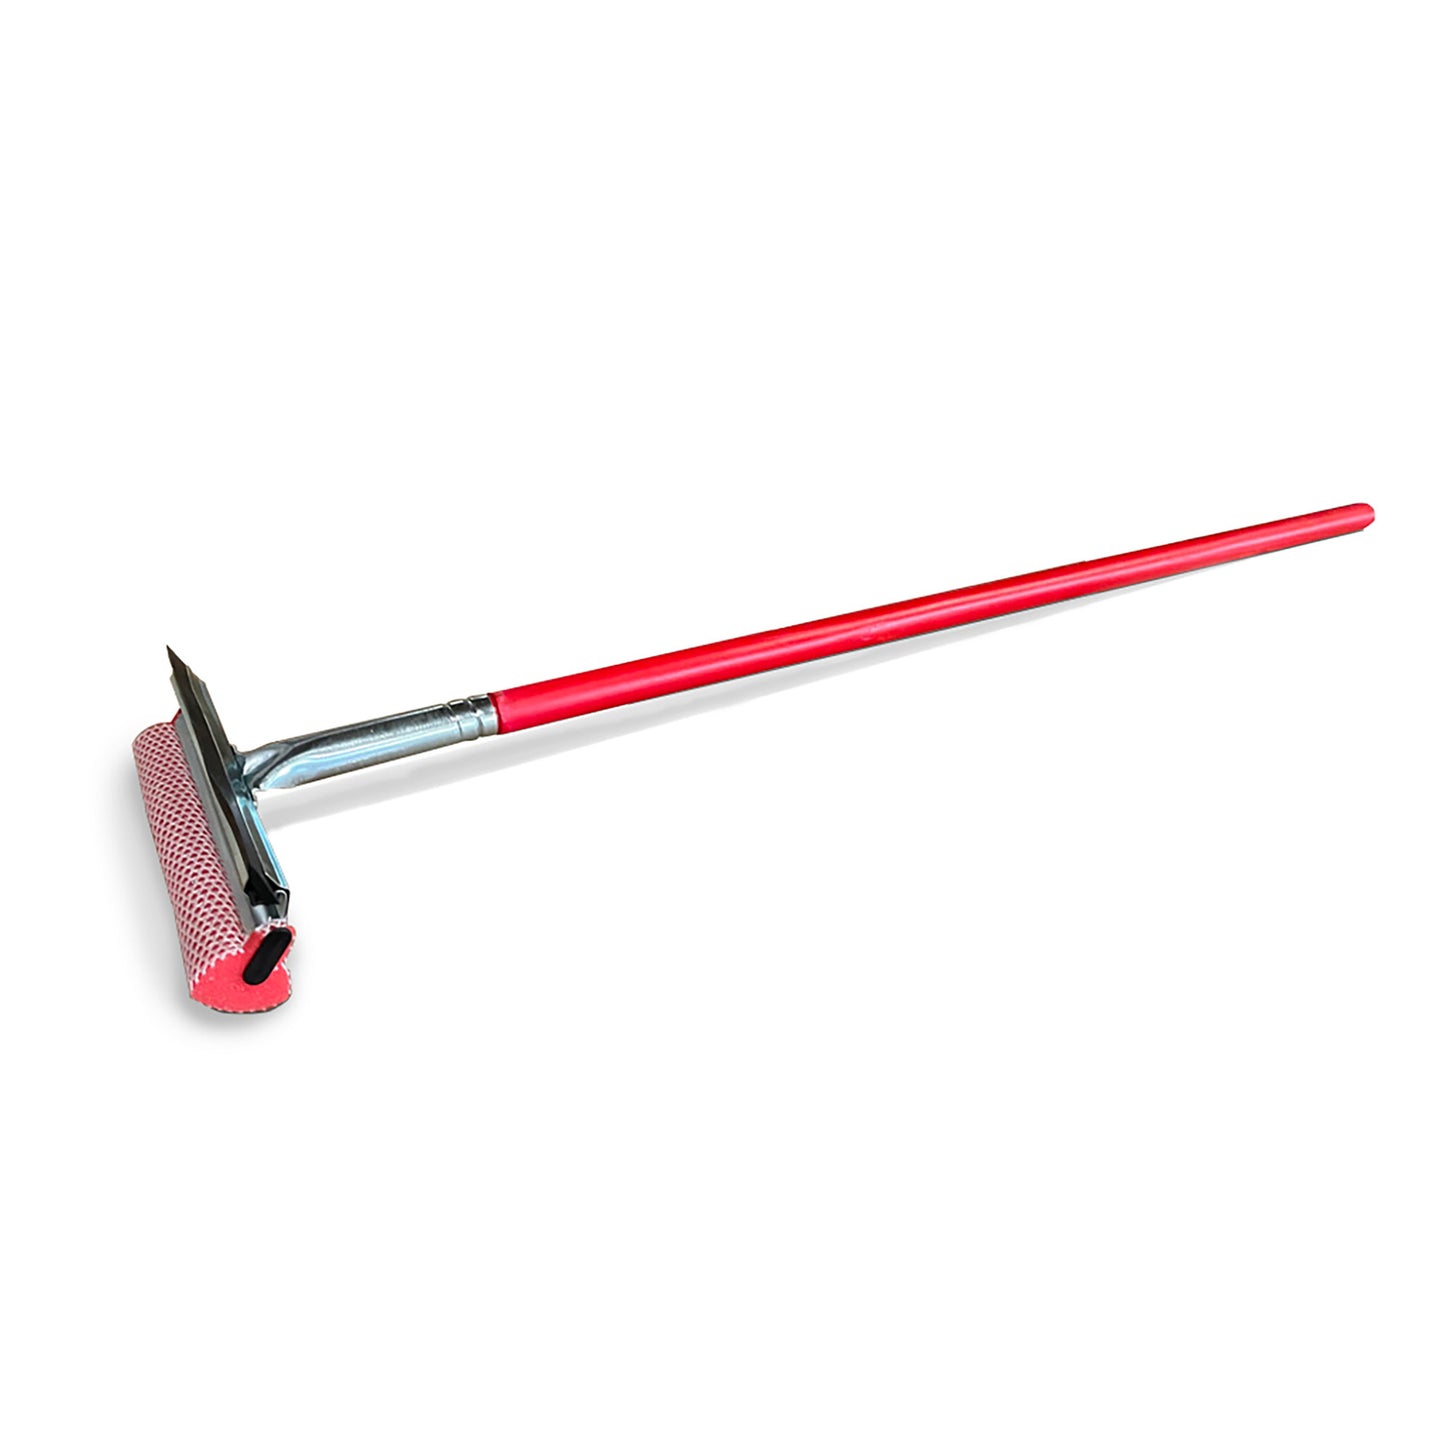 Squeegee 8" Metal Head with a 30" Wooden Handle - 24 Pack